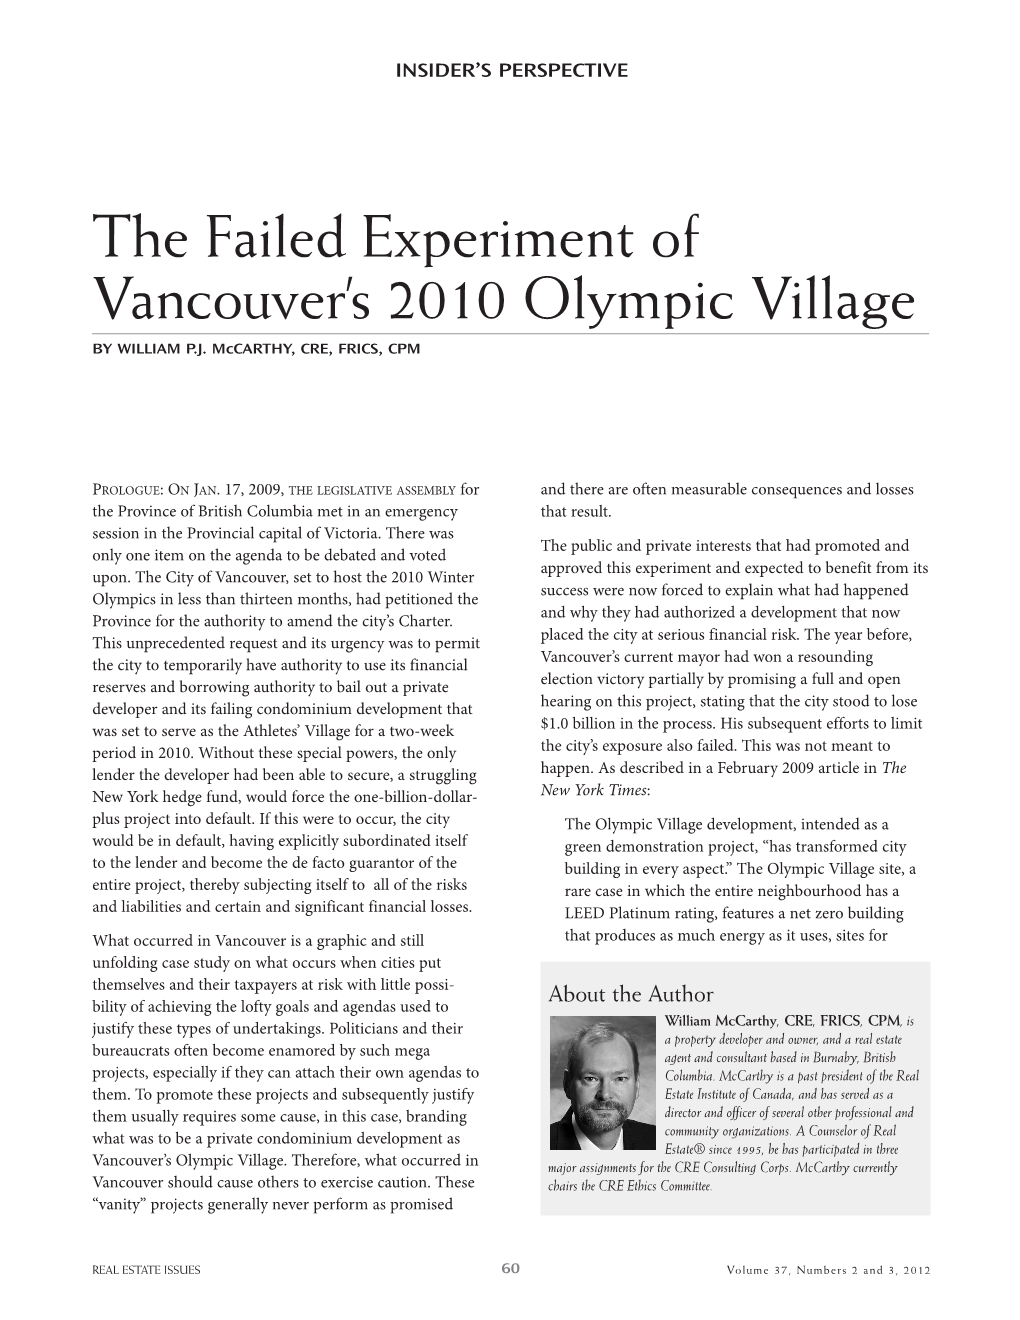 The Failed Experiment of Vancouver's 2010 Olympic Village